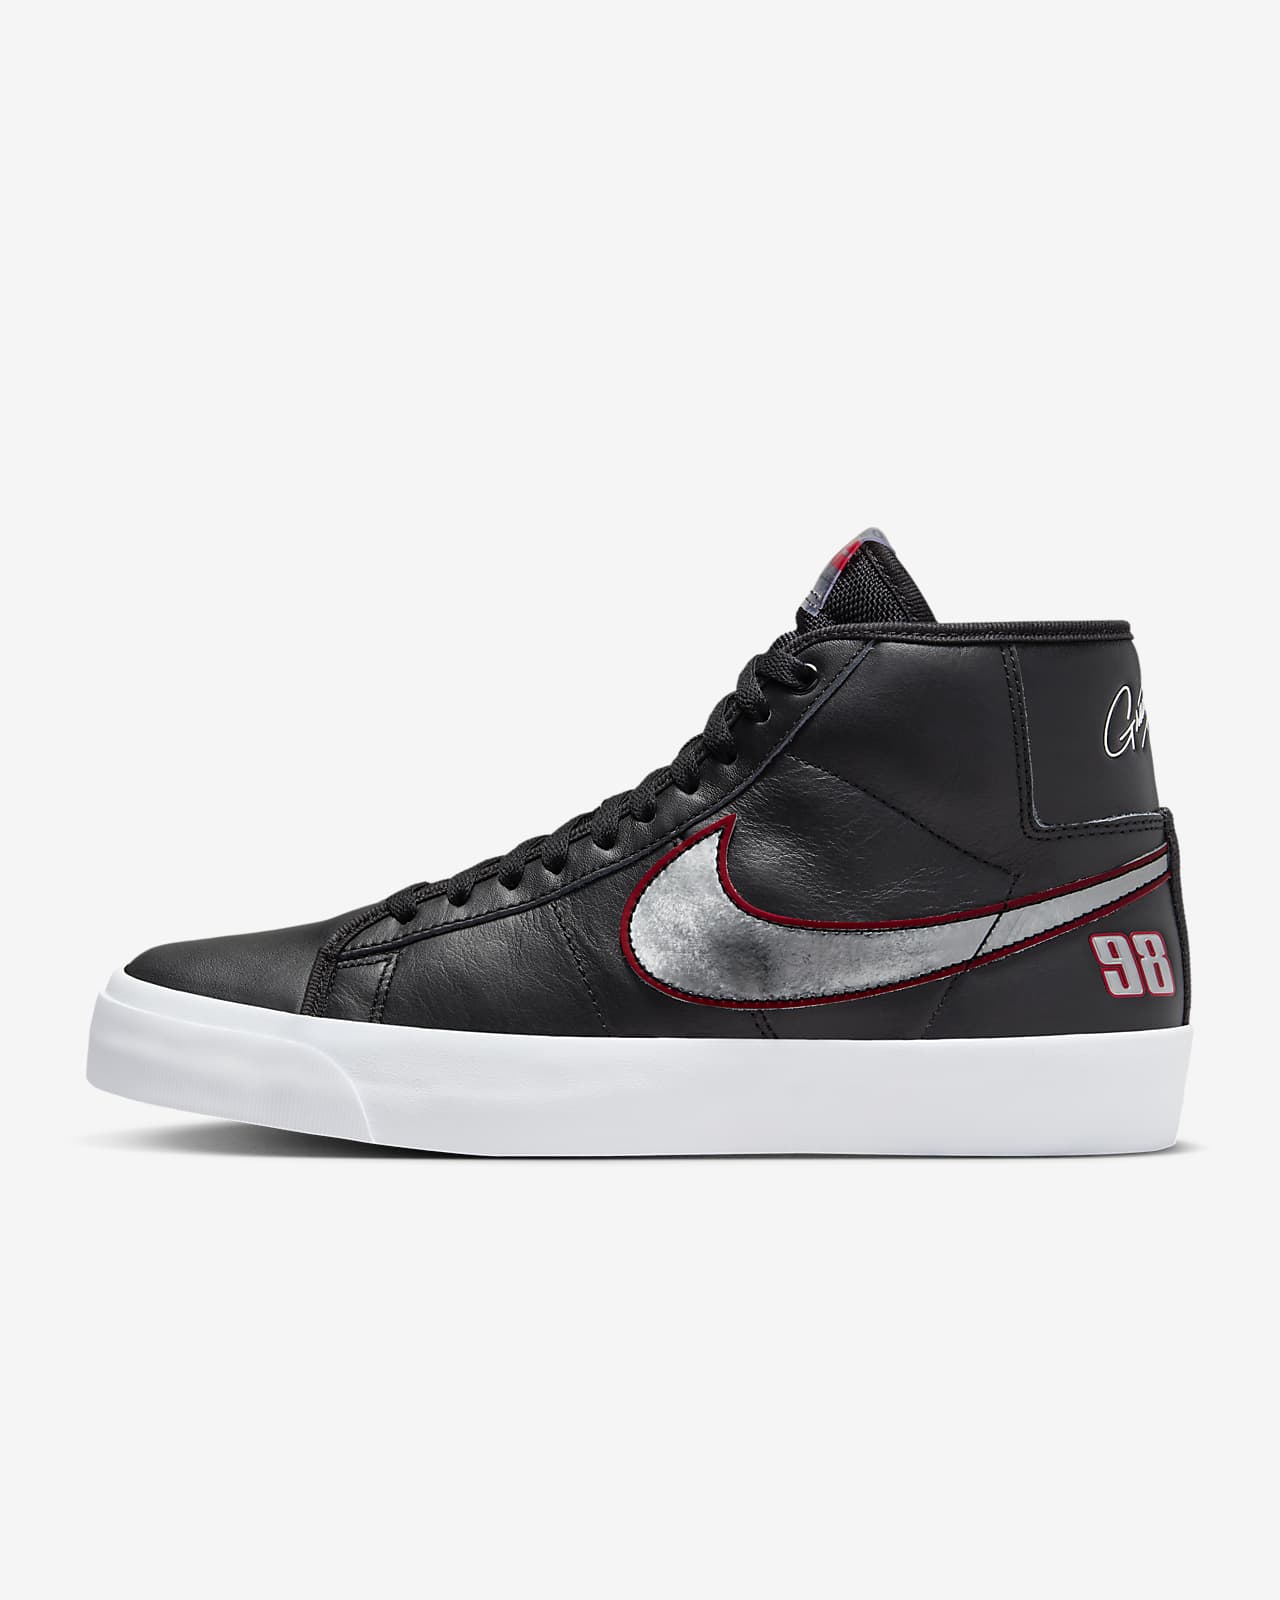 Nike Zoom Blazer Mid Pro GT Skate Shoes Review